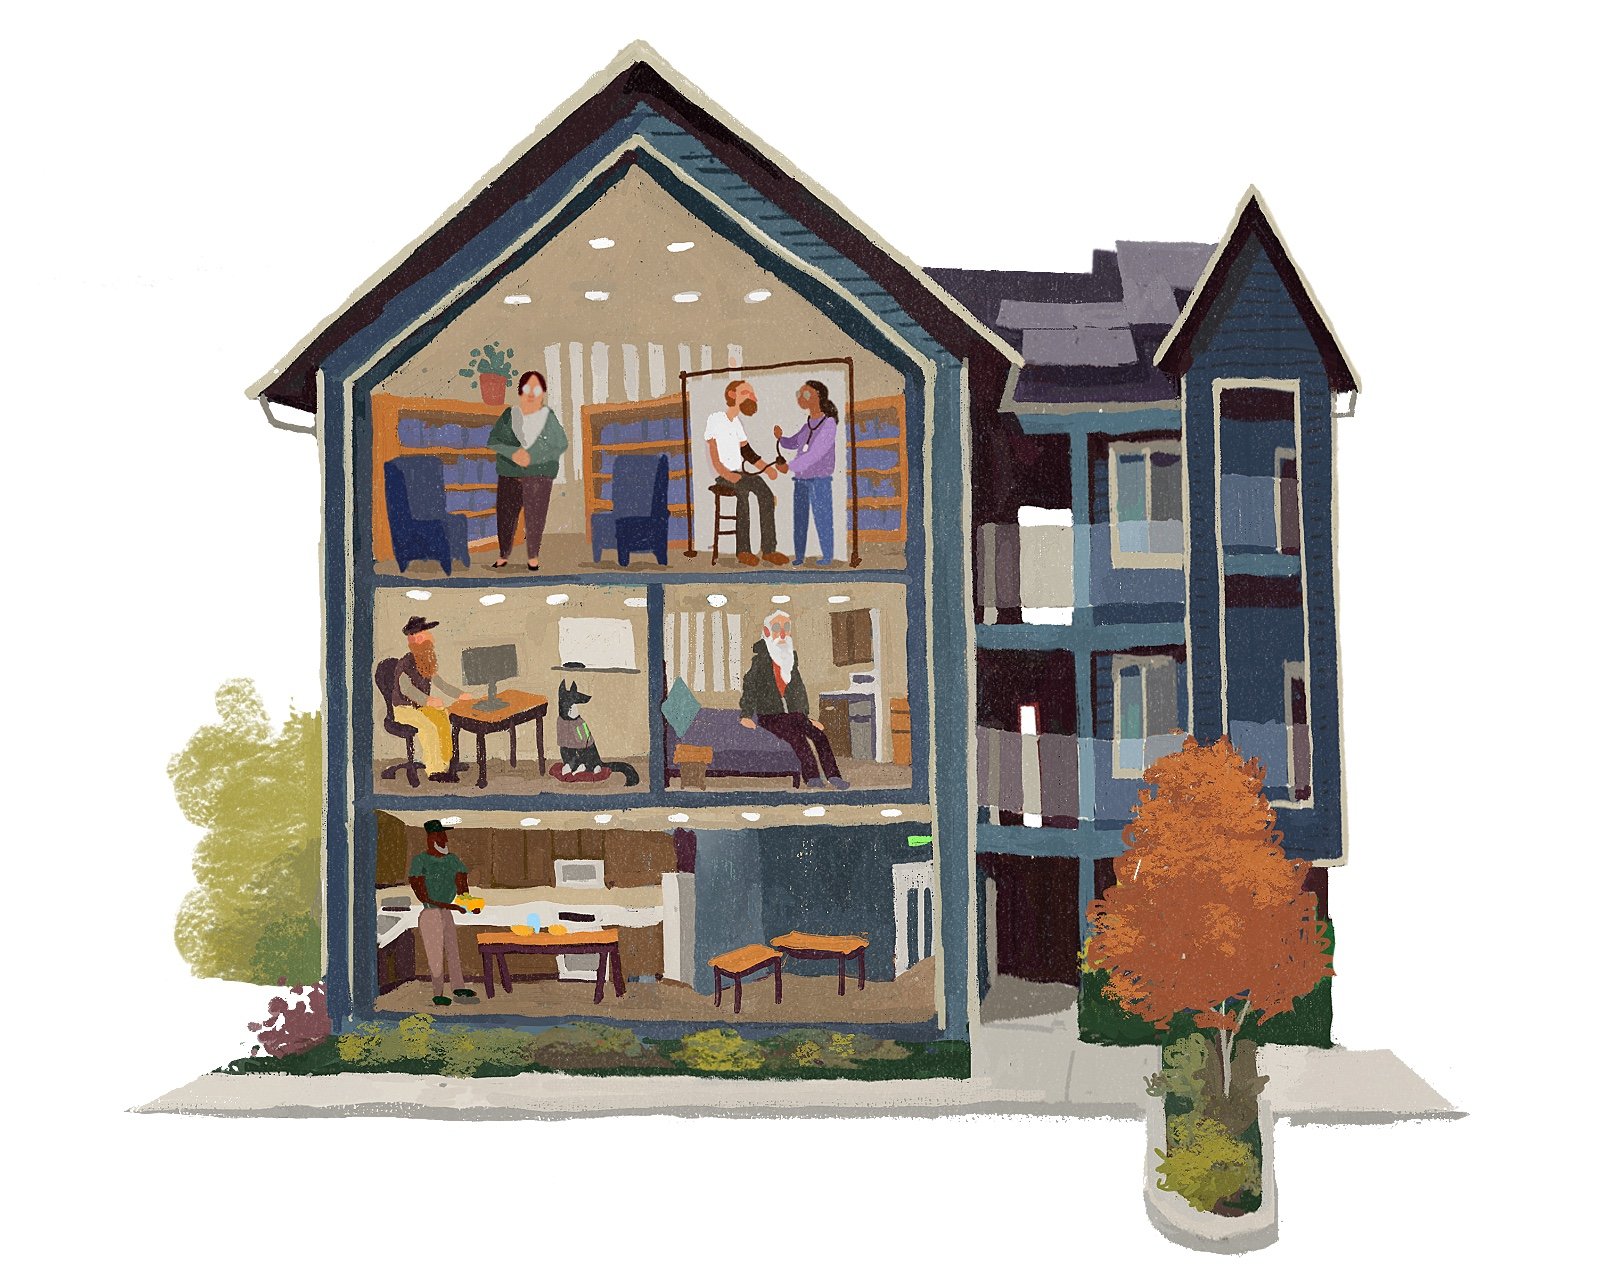  Illustration depicting supportive housing for the Portland Stack  